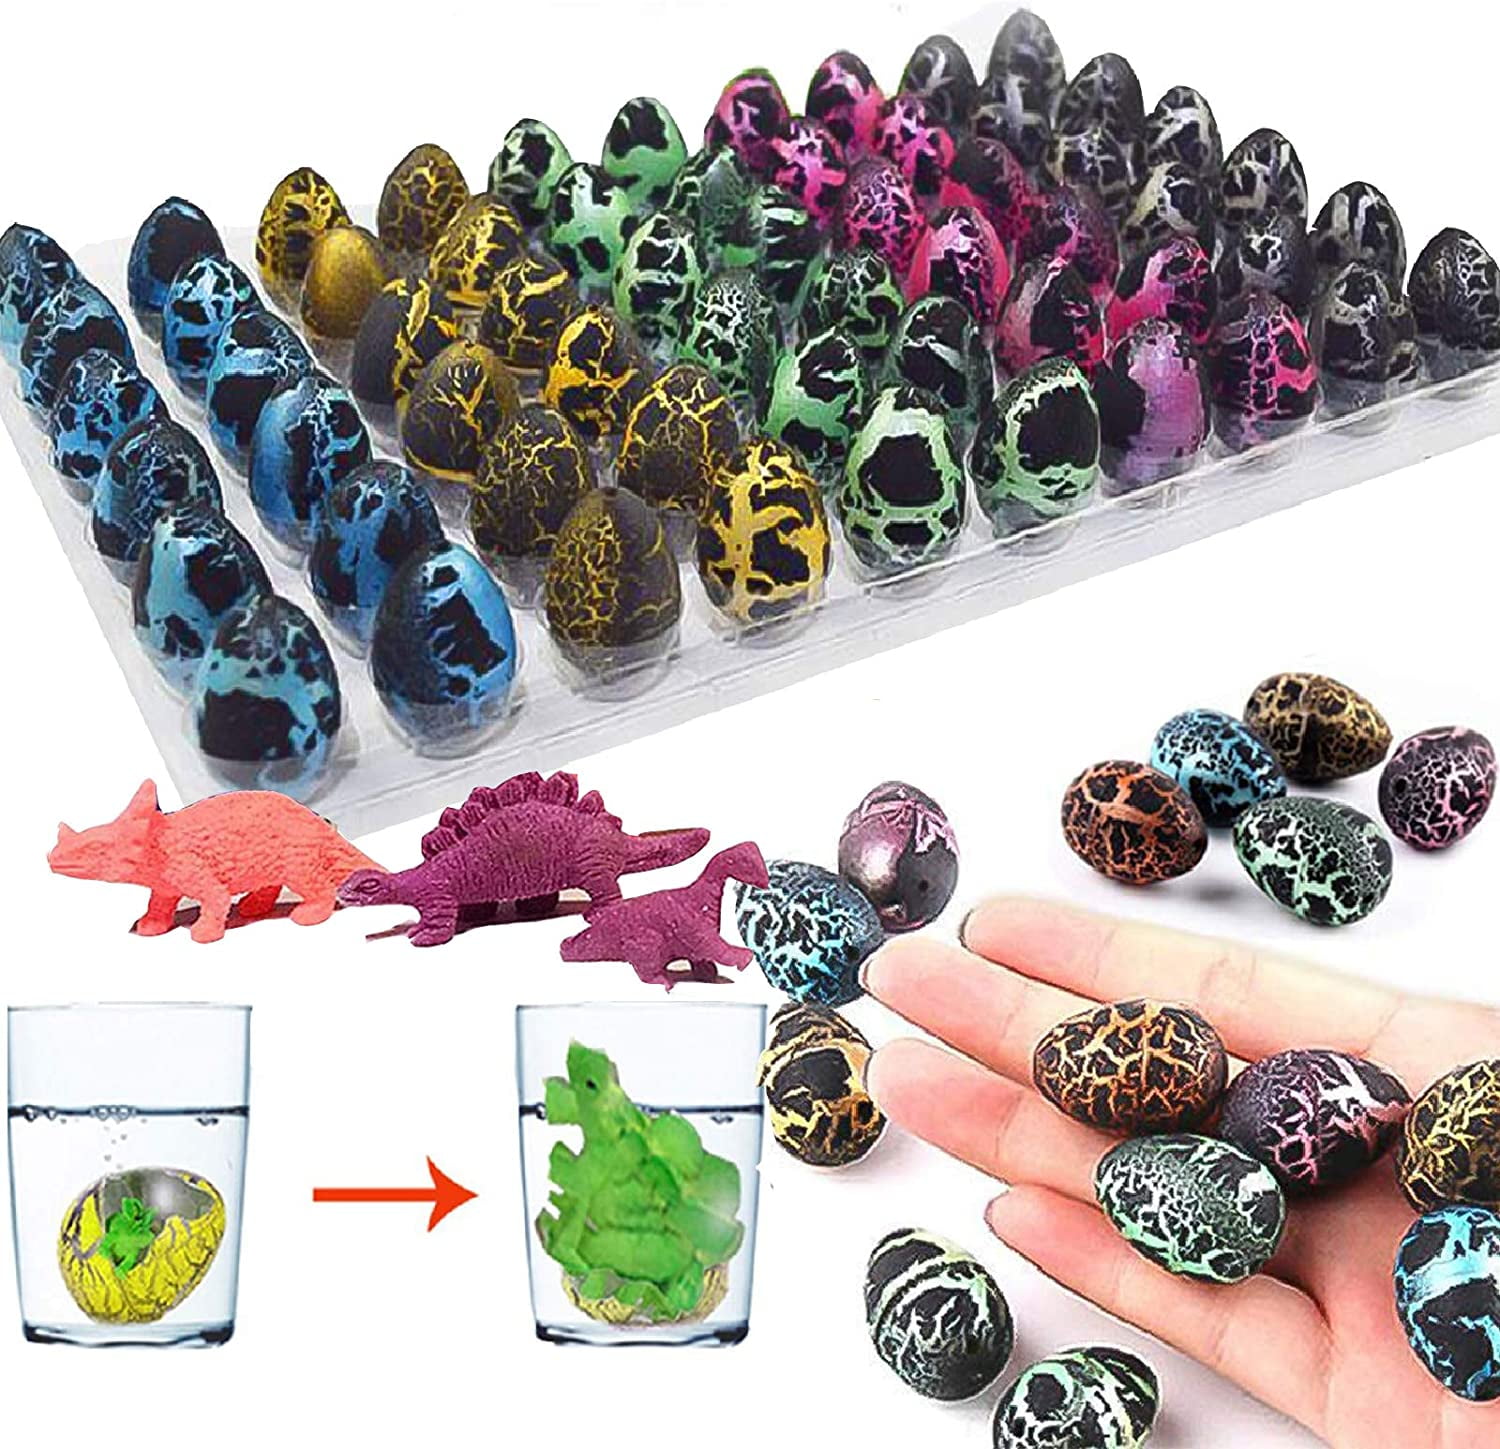 Details about   12Pcs/set Magical Dino Eggs Growing Hatching Dinosaur Add Water Kids Gift Toys 